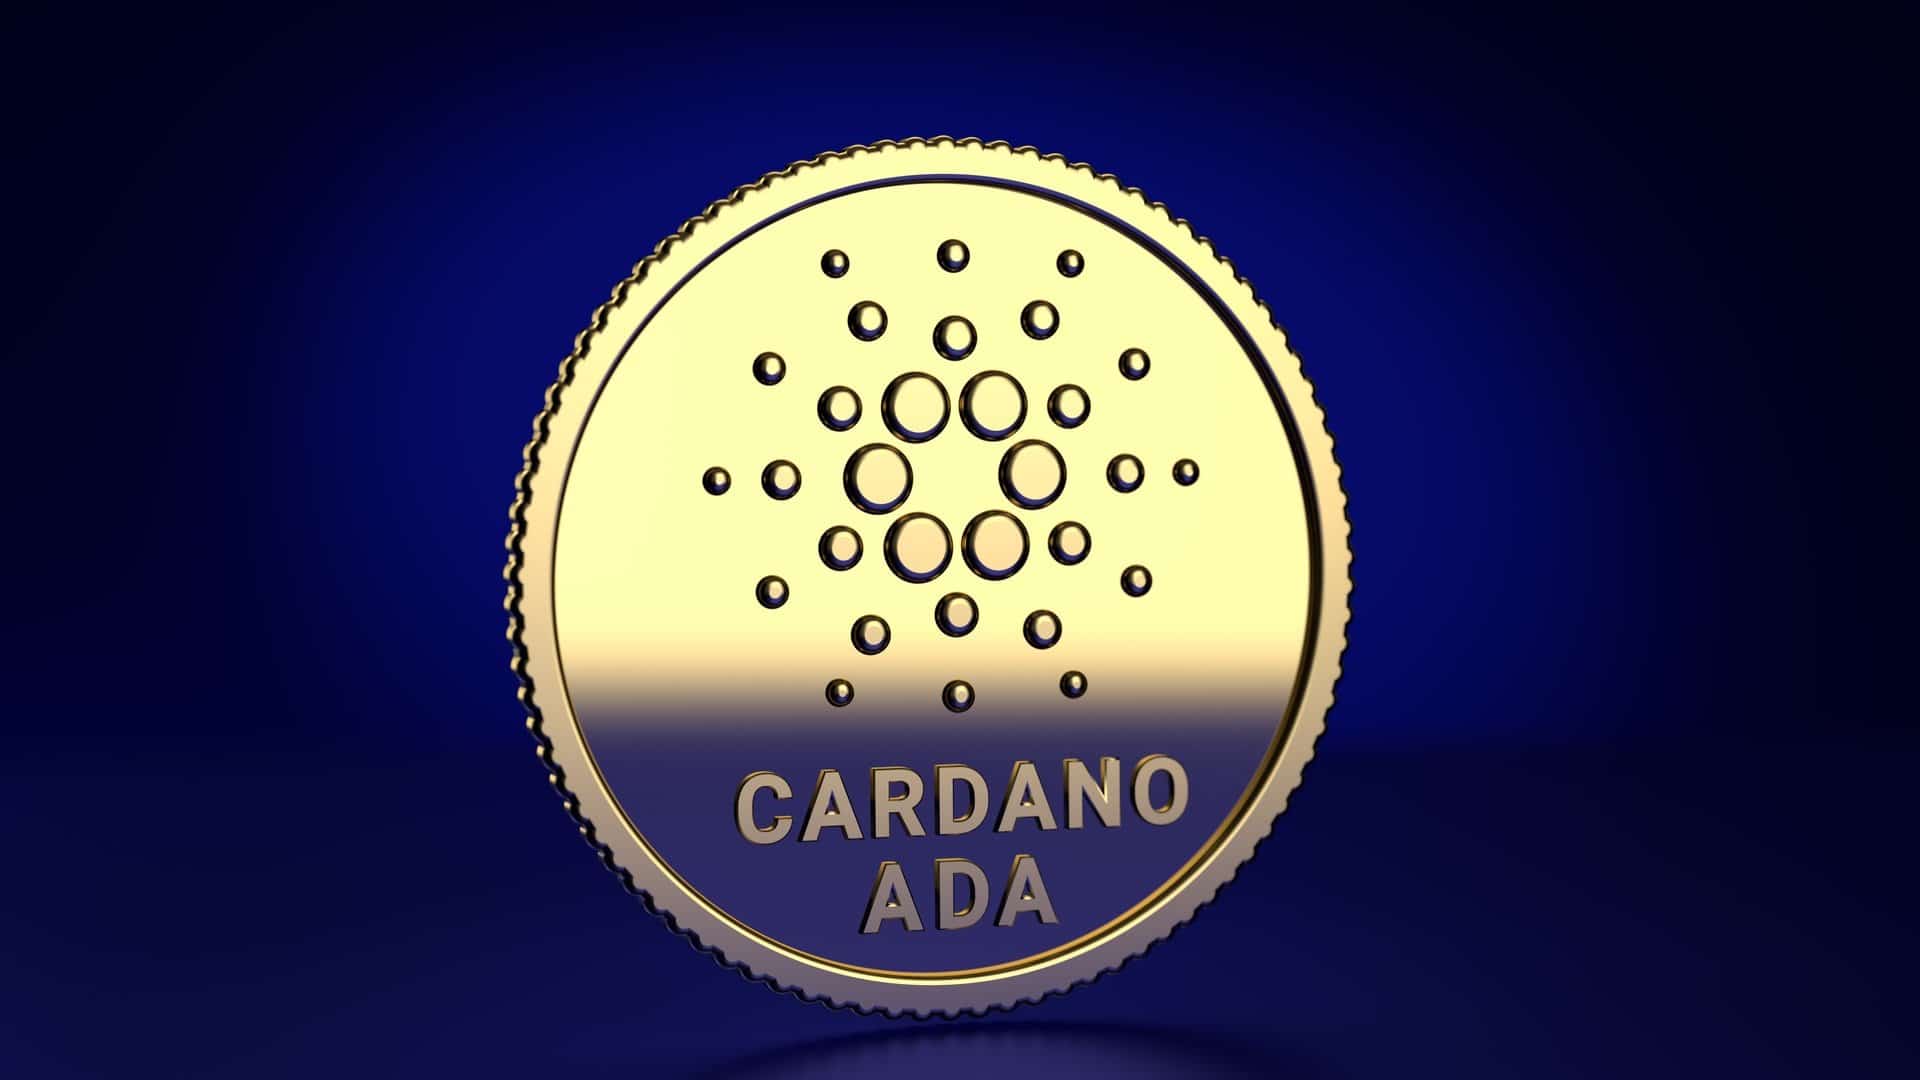 Cardano Price Prediction: Current Price Surge Unlikely to Hold